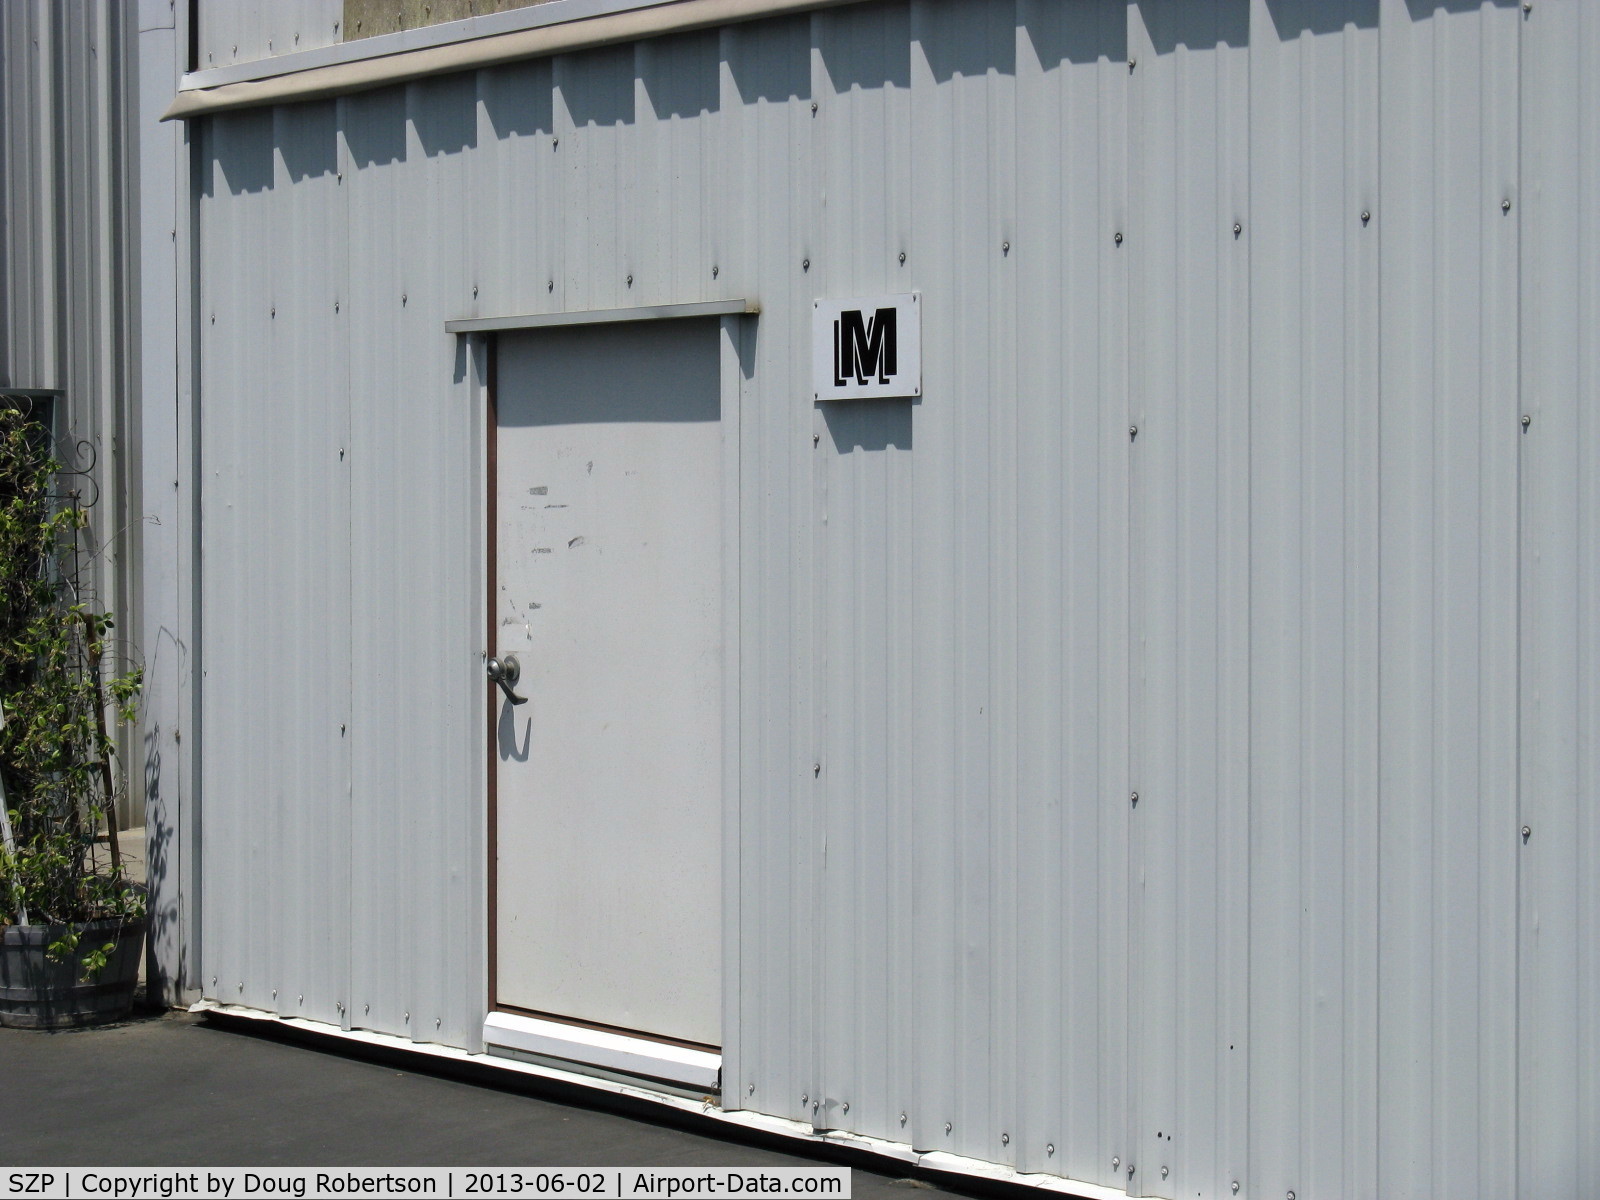 Santa Paula Airport (SZP) - Deluxe Hangar M FOR SALE, one of the largest at SZP